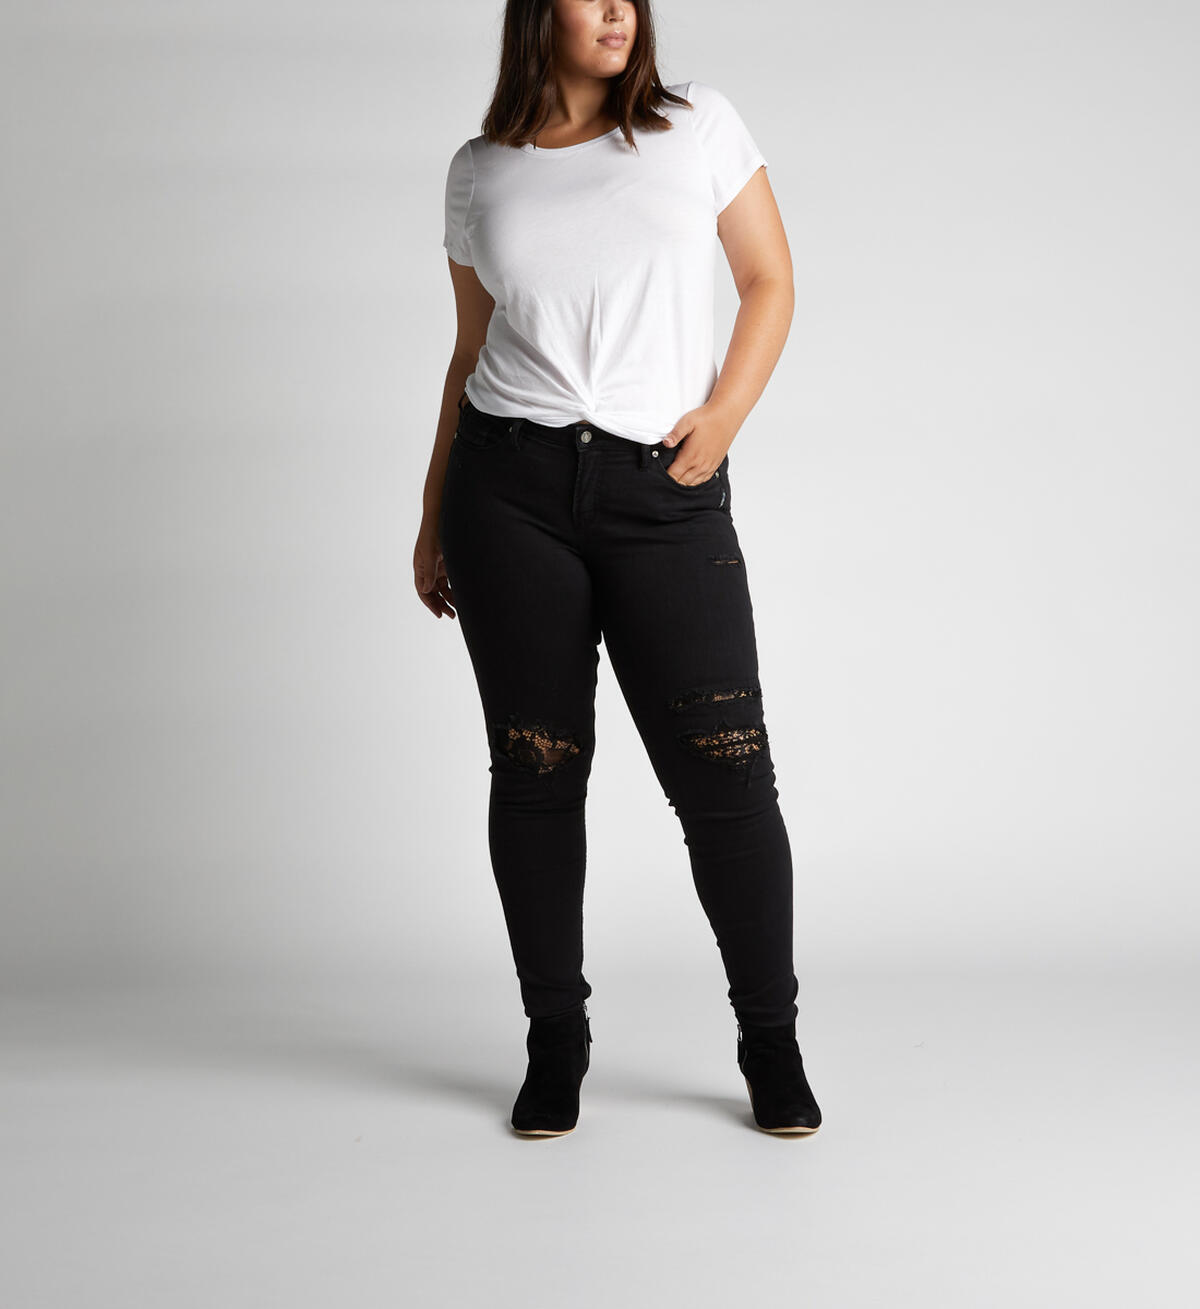 Aiko Mid Rise Skinny Leg Jeans Plus Size Final Sale, , hi-res image number 3